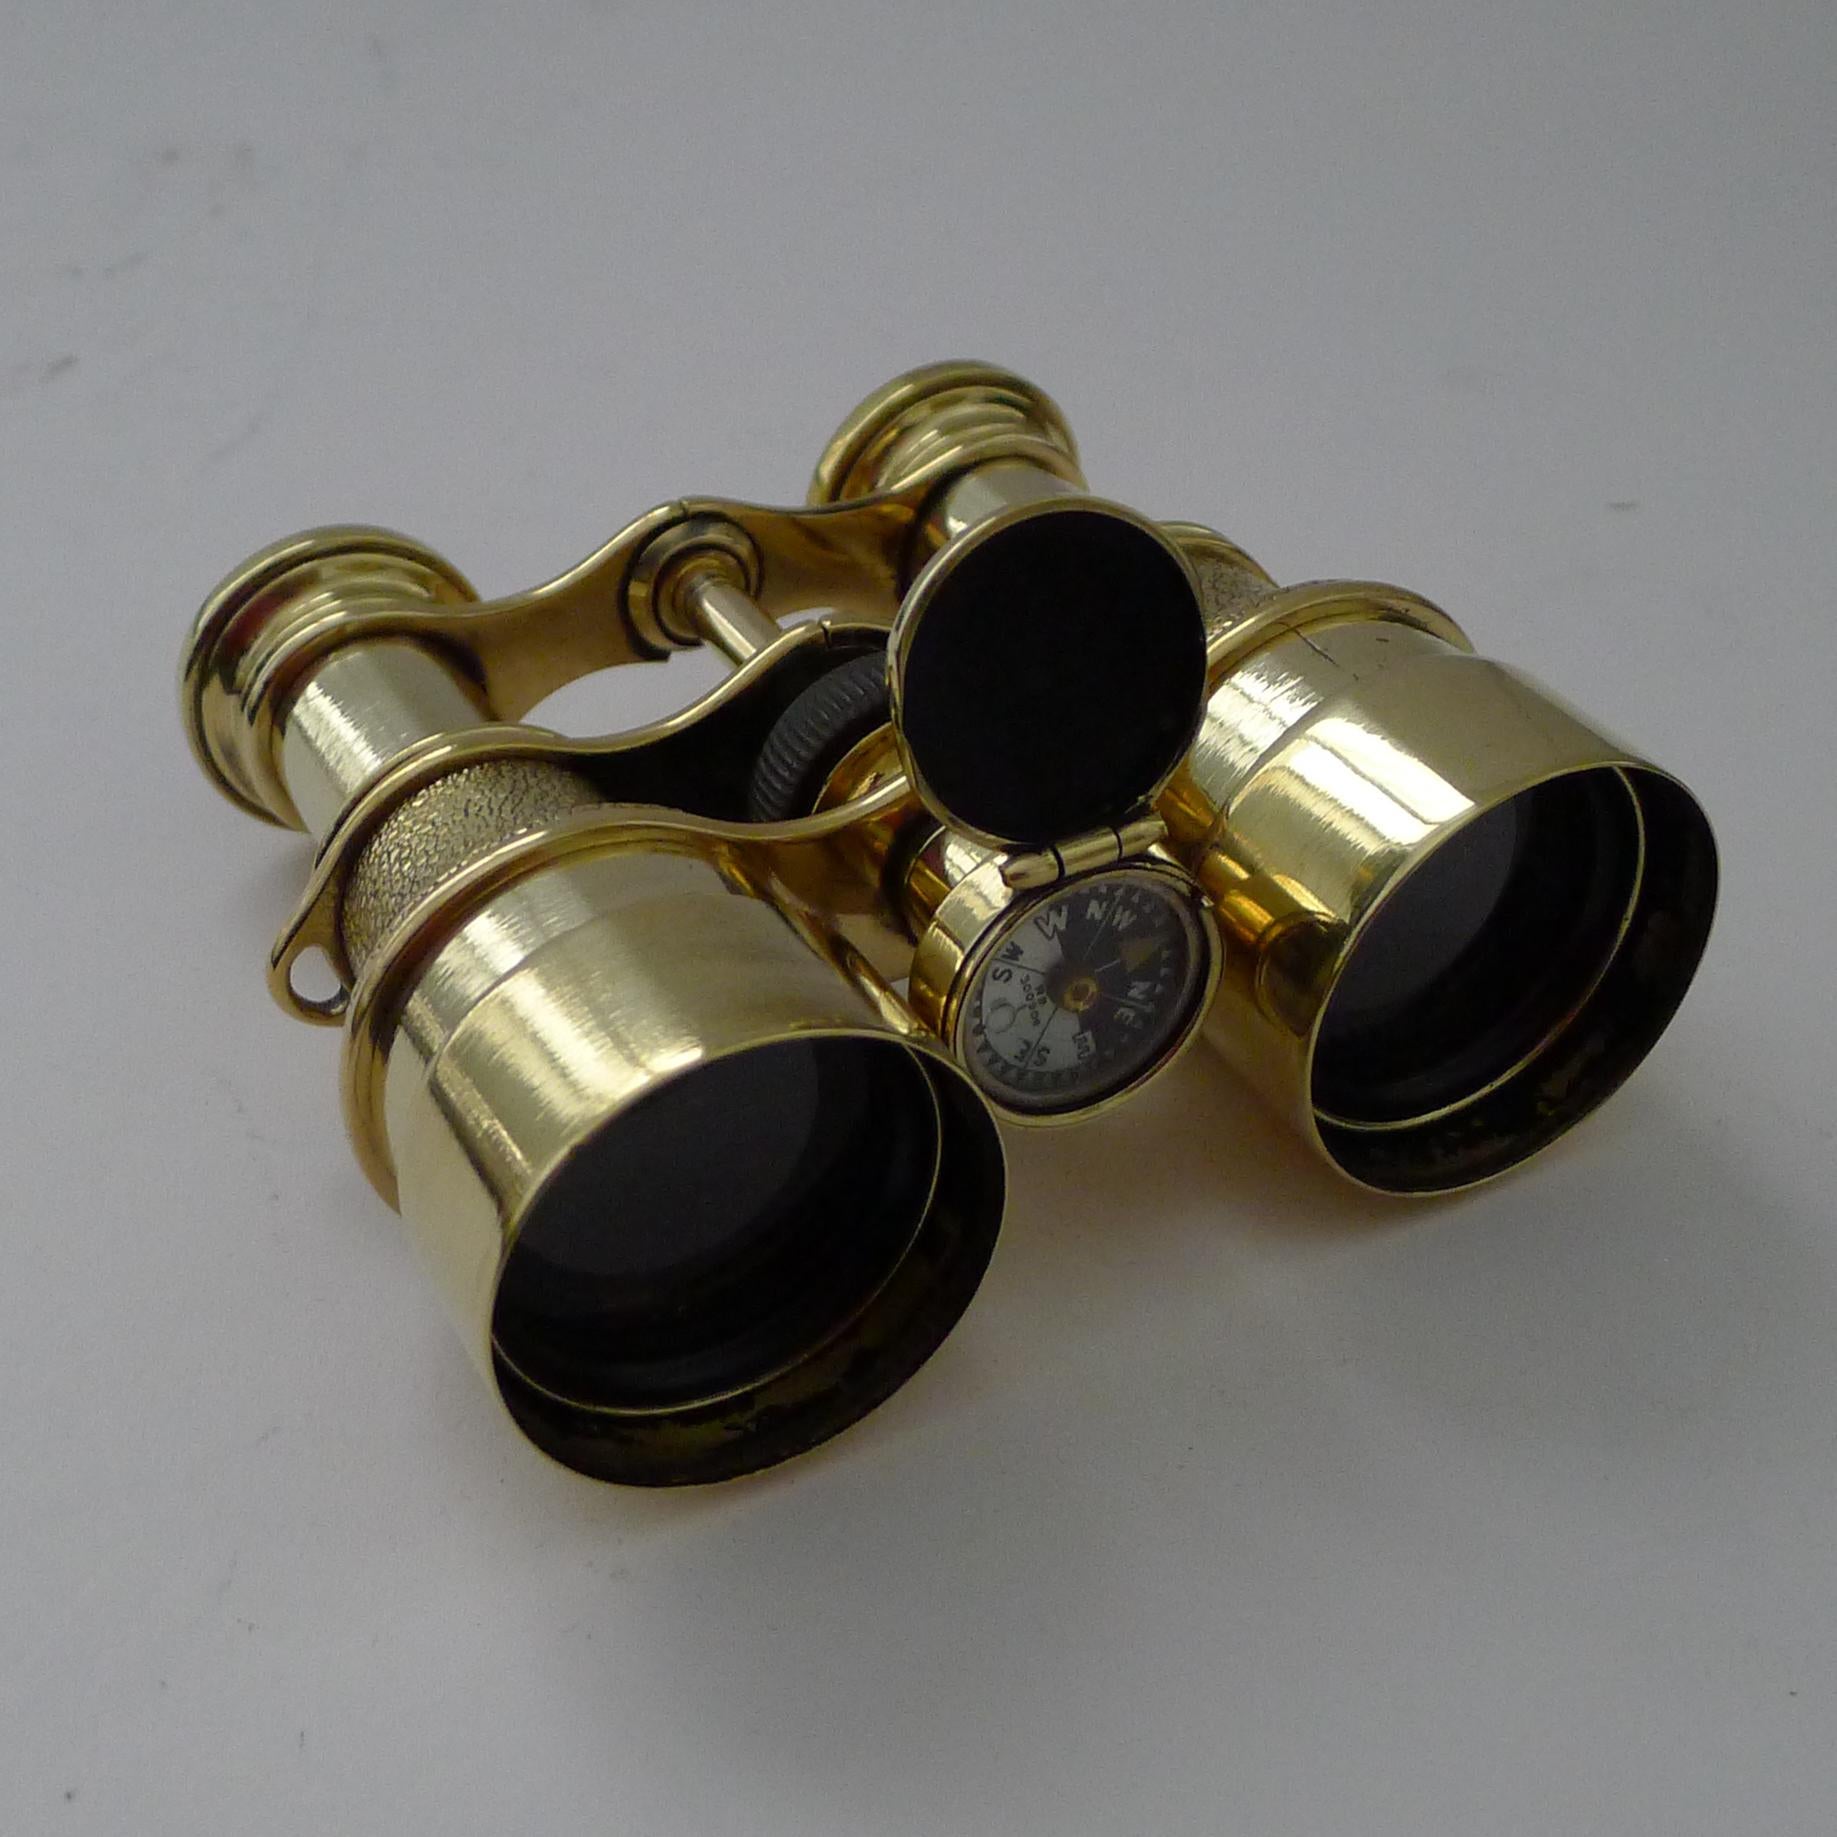 Late Victorian Antique English Field Glasses / Binoculars by Lawrence and Mayo - With Compass For Sale